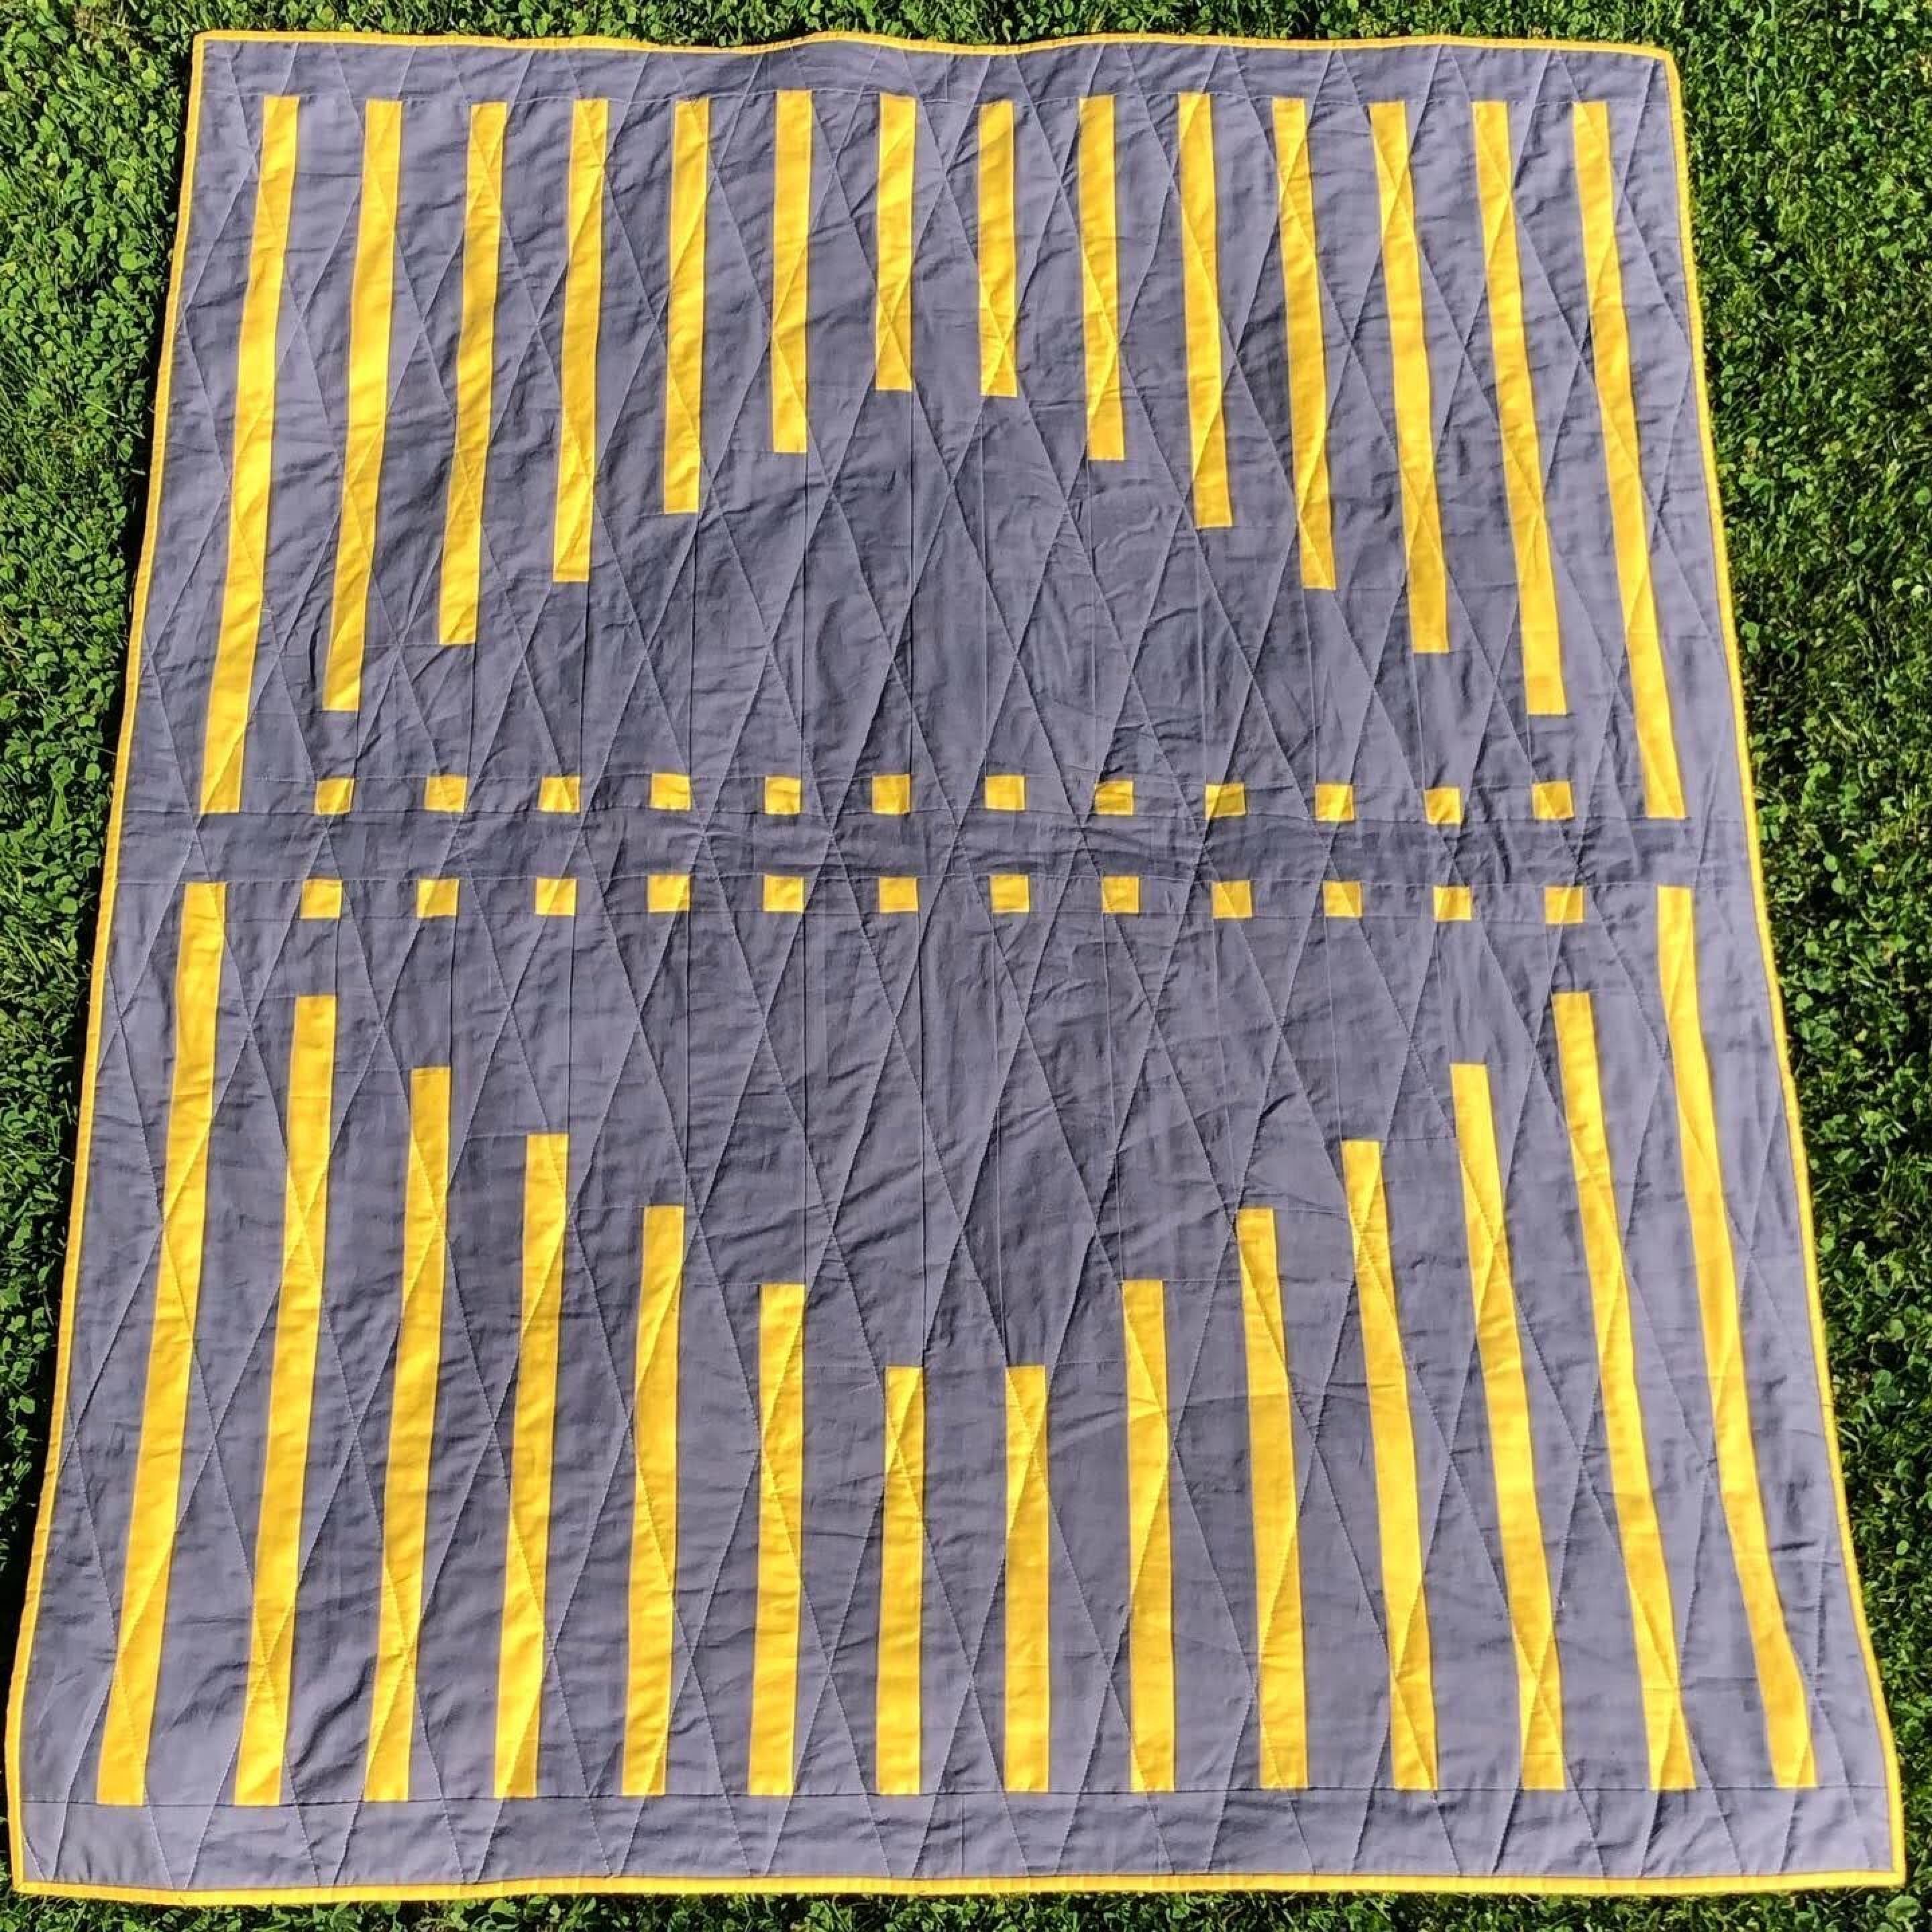 A yellow and grey quilt laid out on the ground